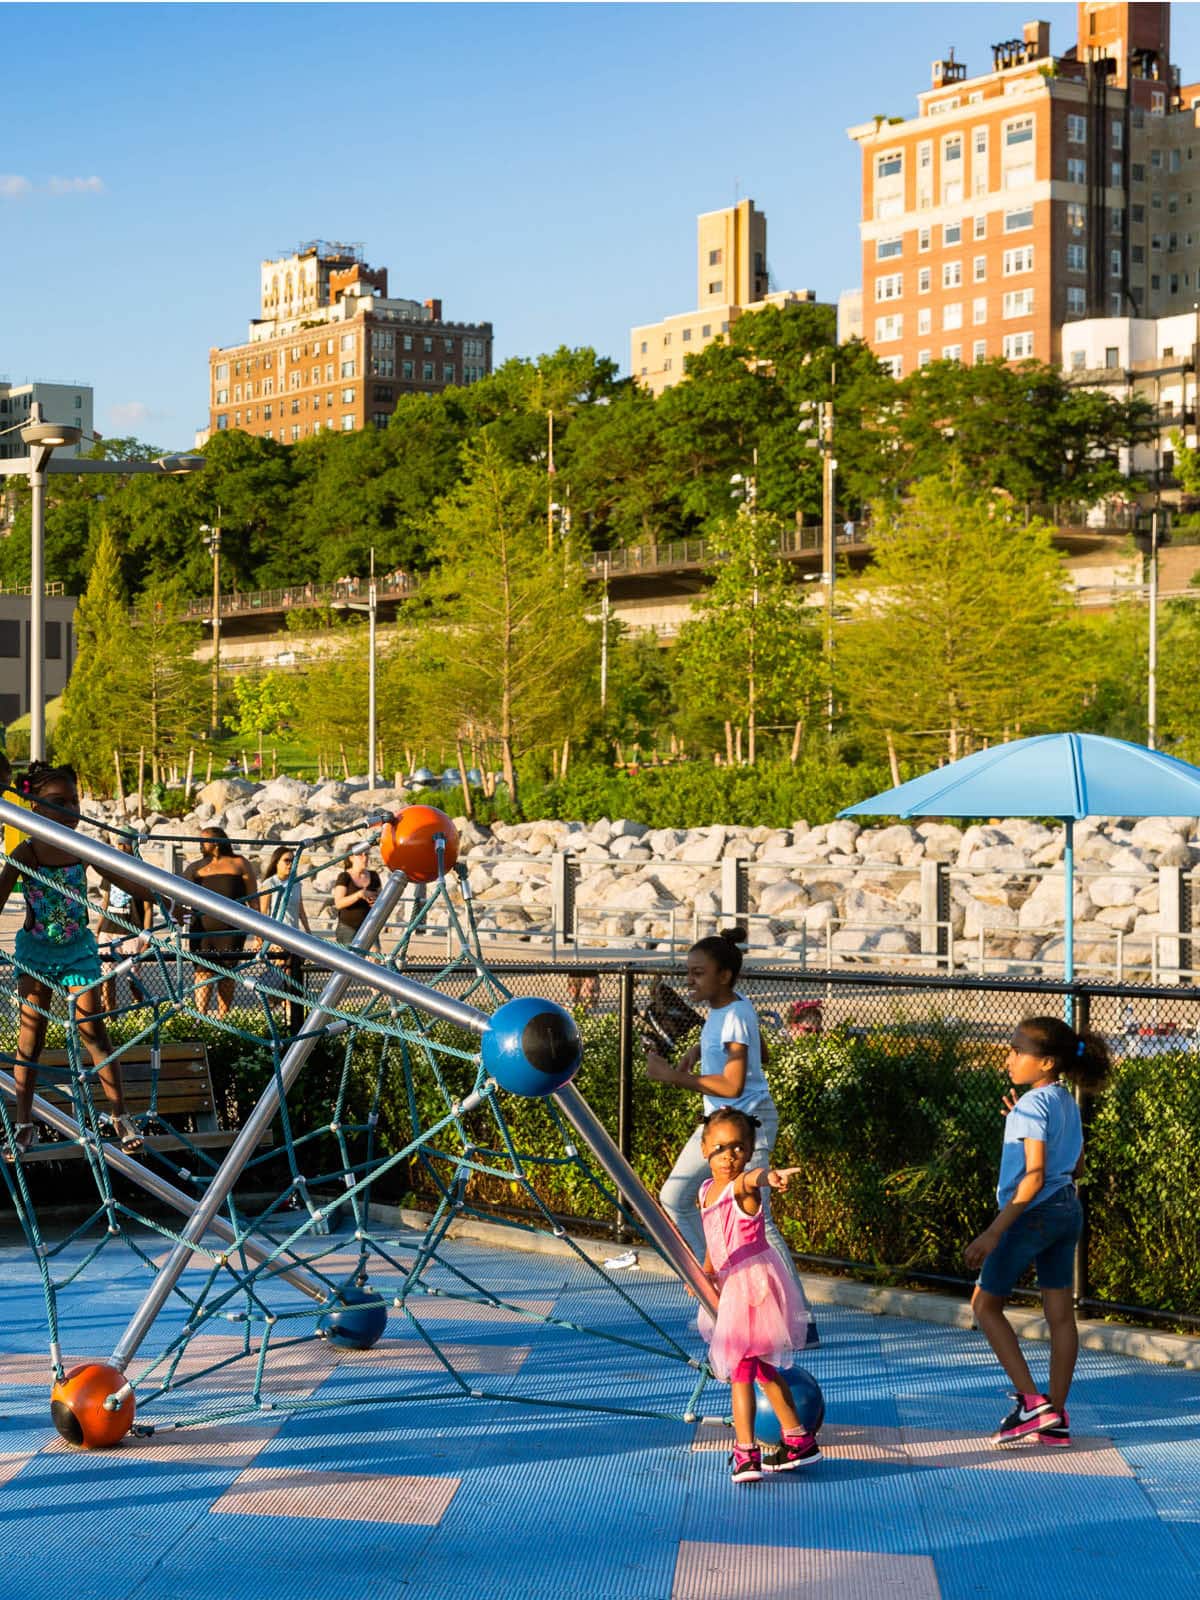 Children playing on climbing structure in a playground at sunset. Brooklyn Heights is seen in the background.